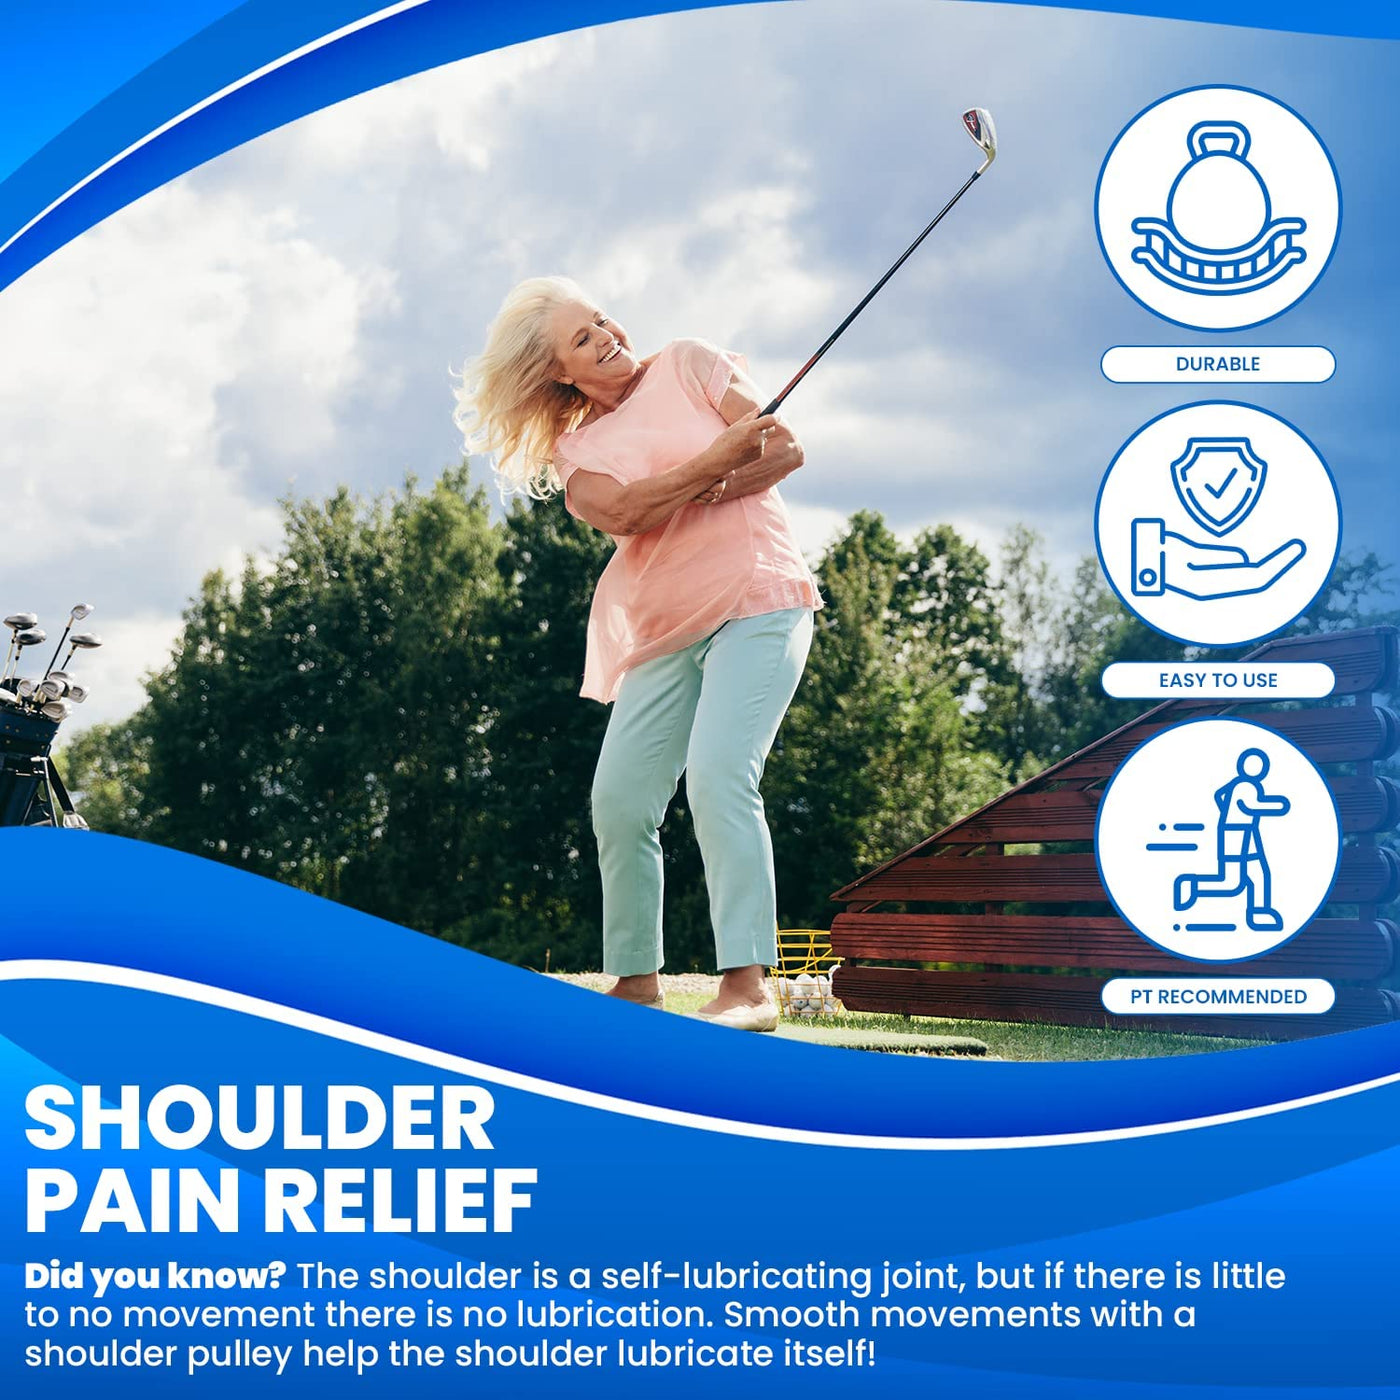 Blueranger Shoulder Pulley with Patient Guide Aids Recovery and Rehabilitation